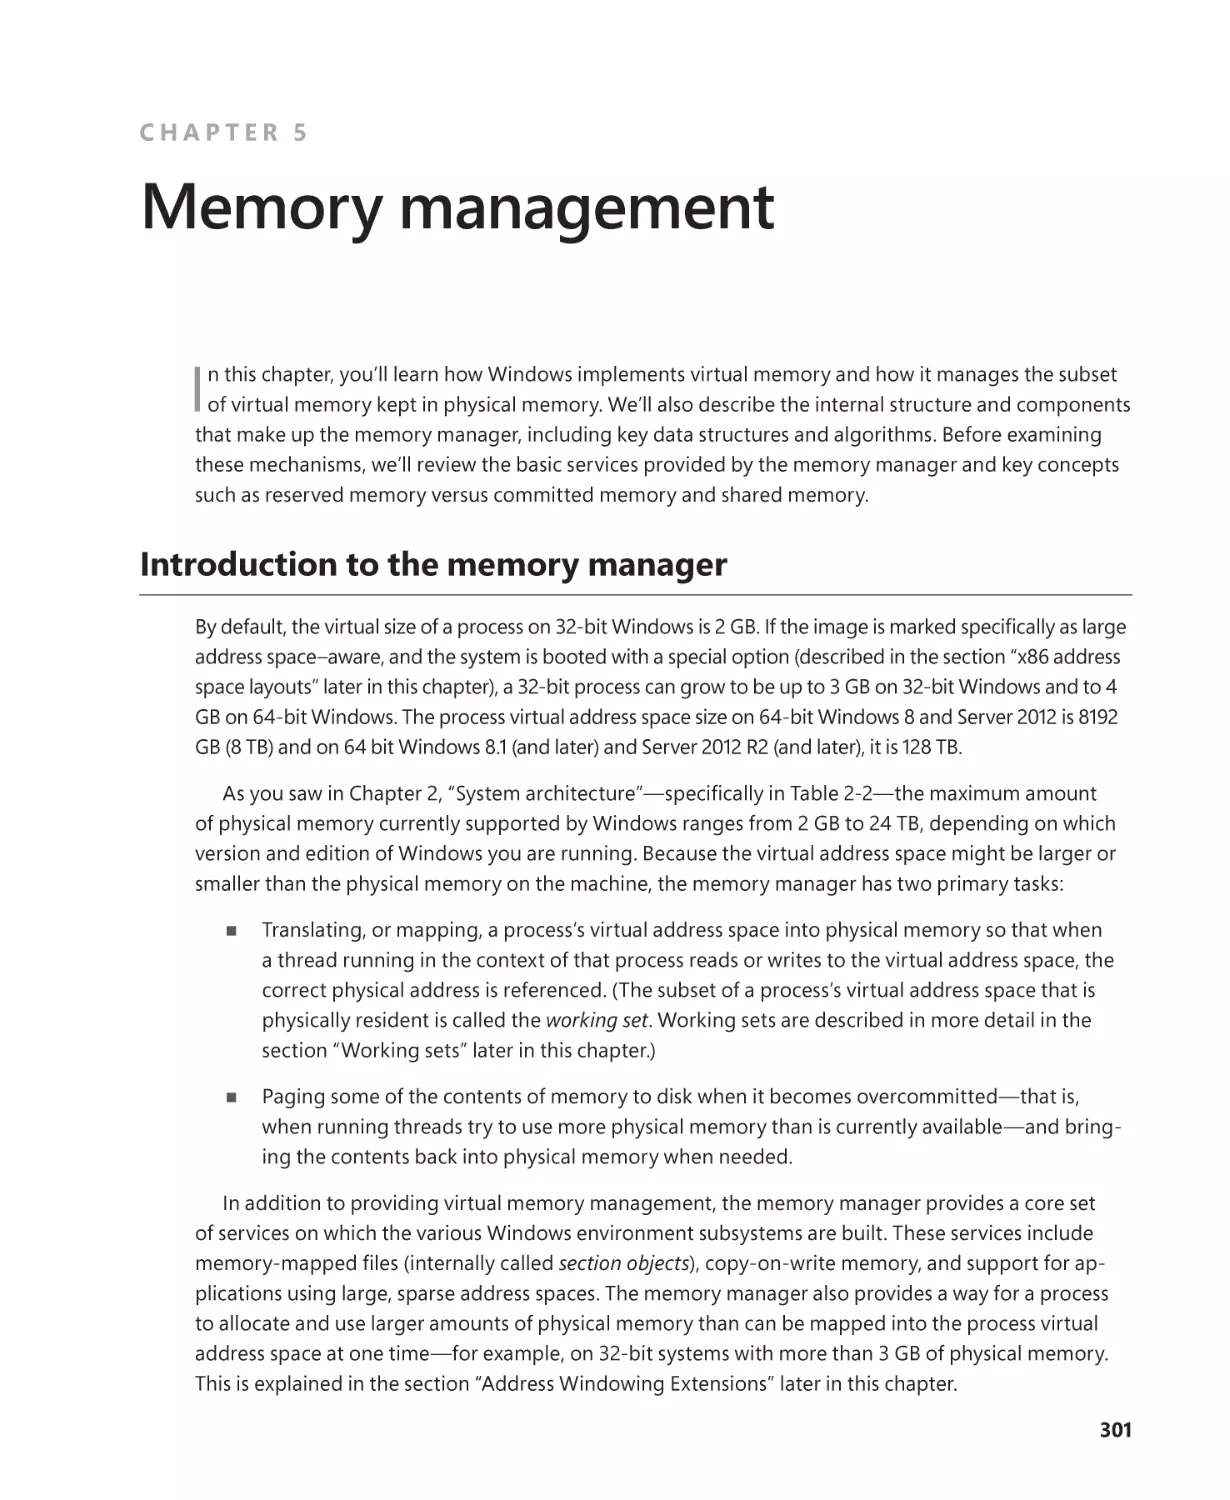 Chapter 5 Memory management
Introduction to the memory manager